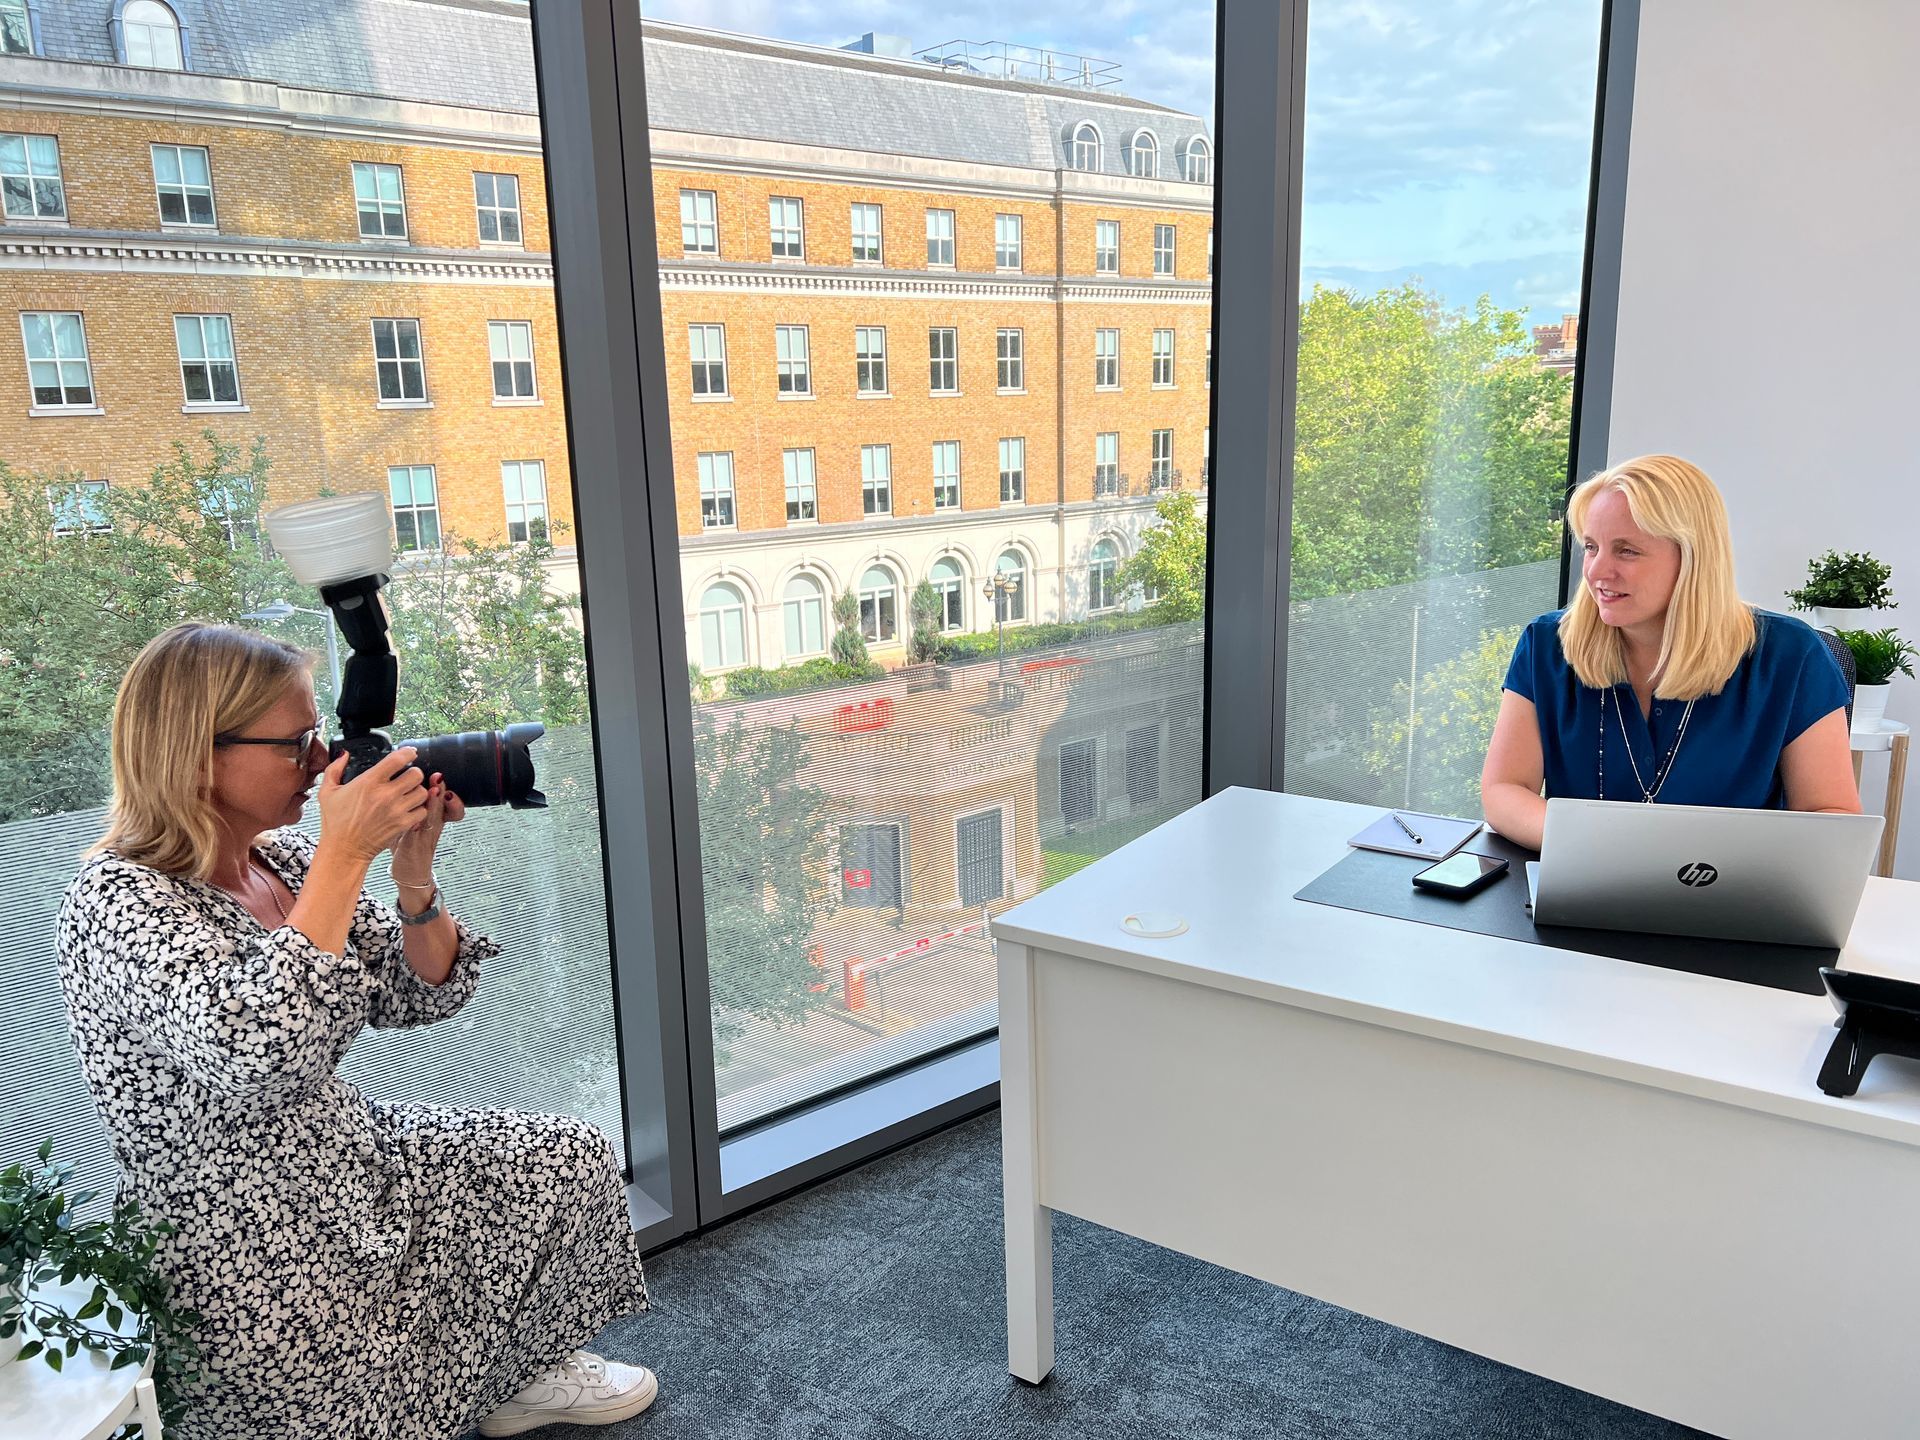 Commercial photographer reading, taking photo of female in glass office